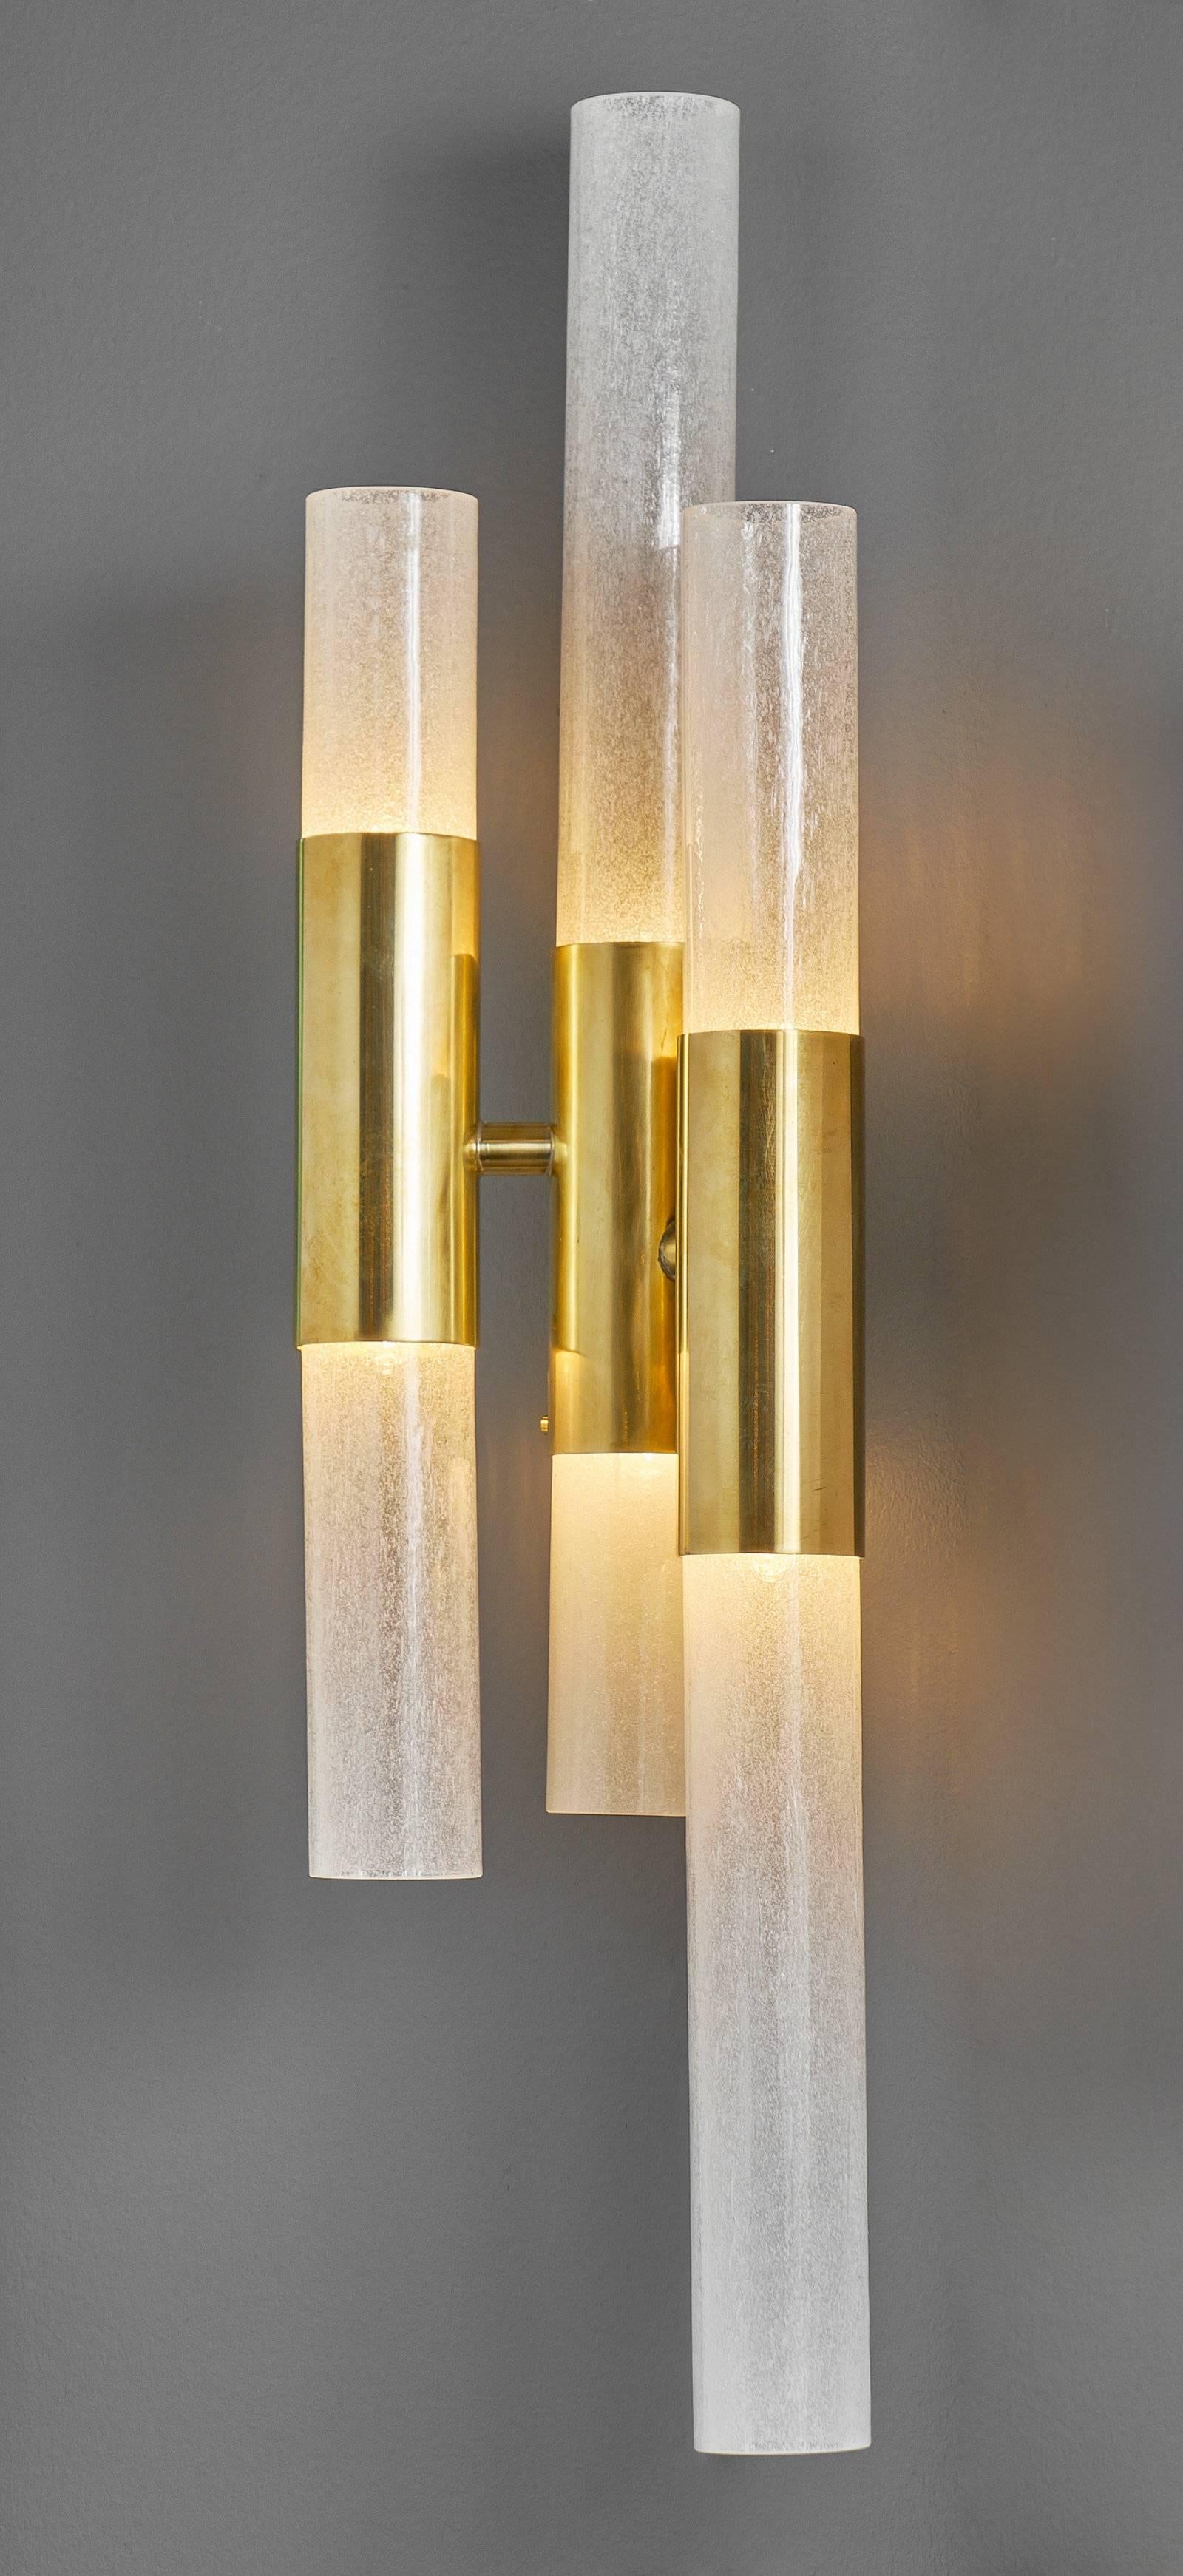 Pair of murano glass tube sconces each featuring “pulegoso” tubes with a gilt brass tubular structure. This pair has been newly wired for US standards.

This pair is located at our dealer's warehouse in Italy.